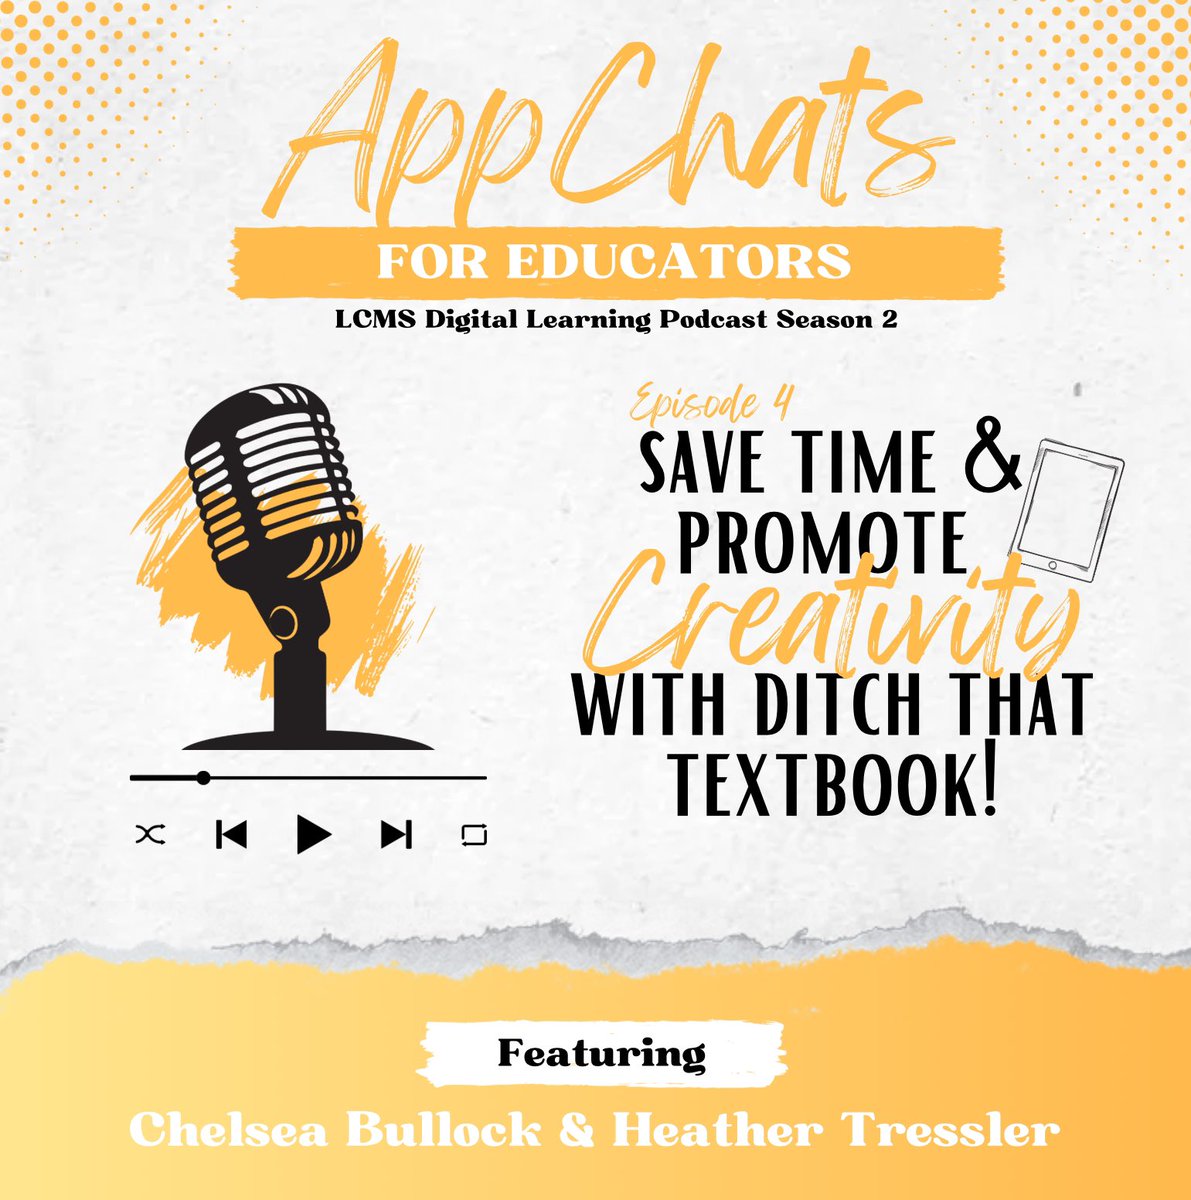 A new episode of our LCMS digital learning podcast is up! This week, 2 teachers discuss how @DitchThatTxtbk has helped them save time & promote creativity in their classrooms! #weareLCP #lcpvanguards #techsupportingTEKS

youtu.be/dUYvwLf7Kl8

@TresslerHe45894 @MrsBullock4Real